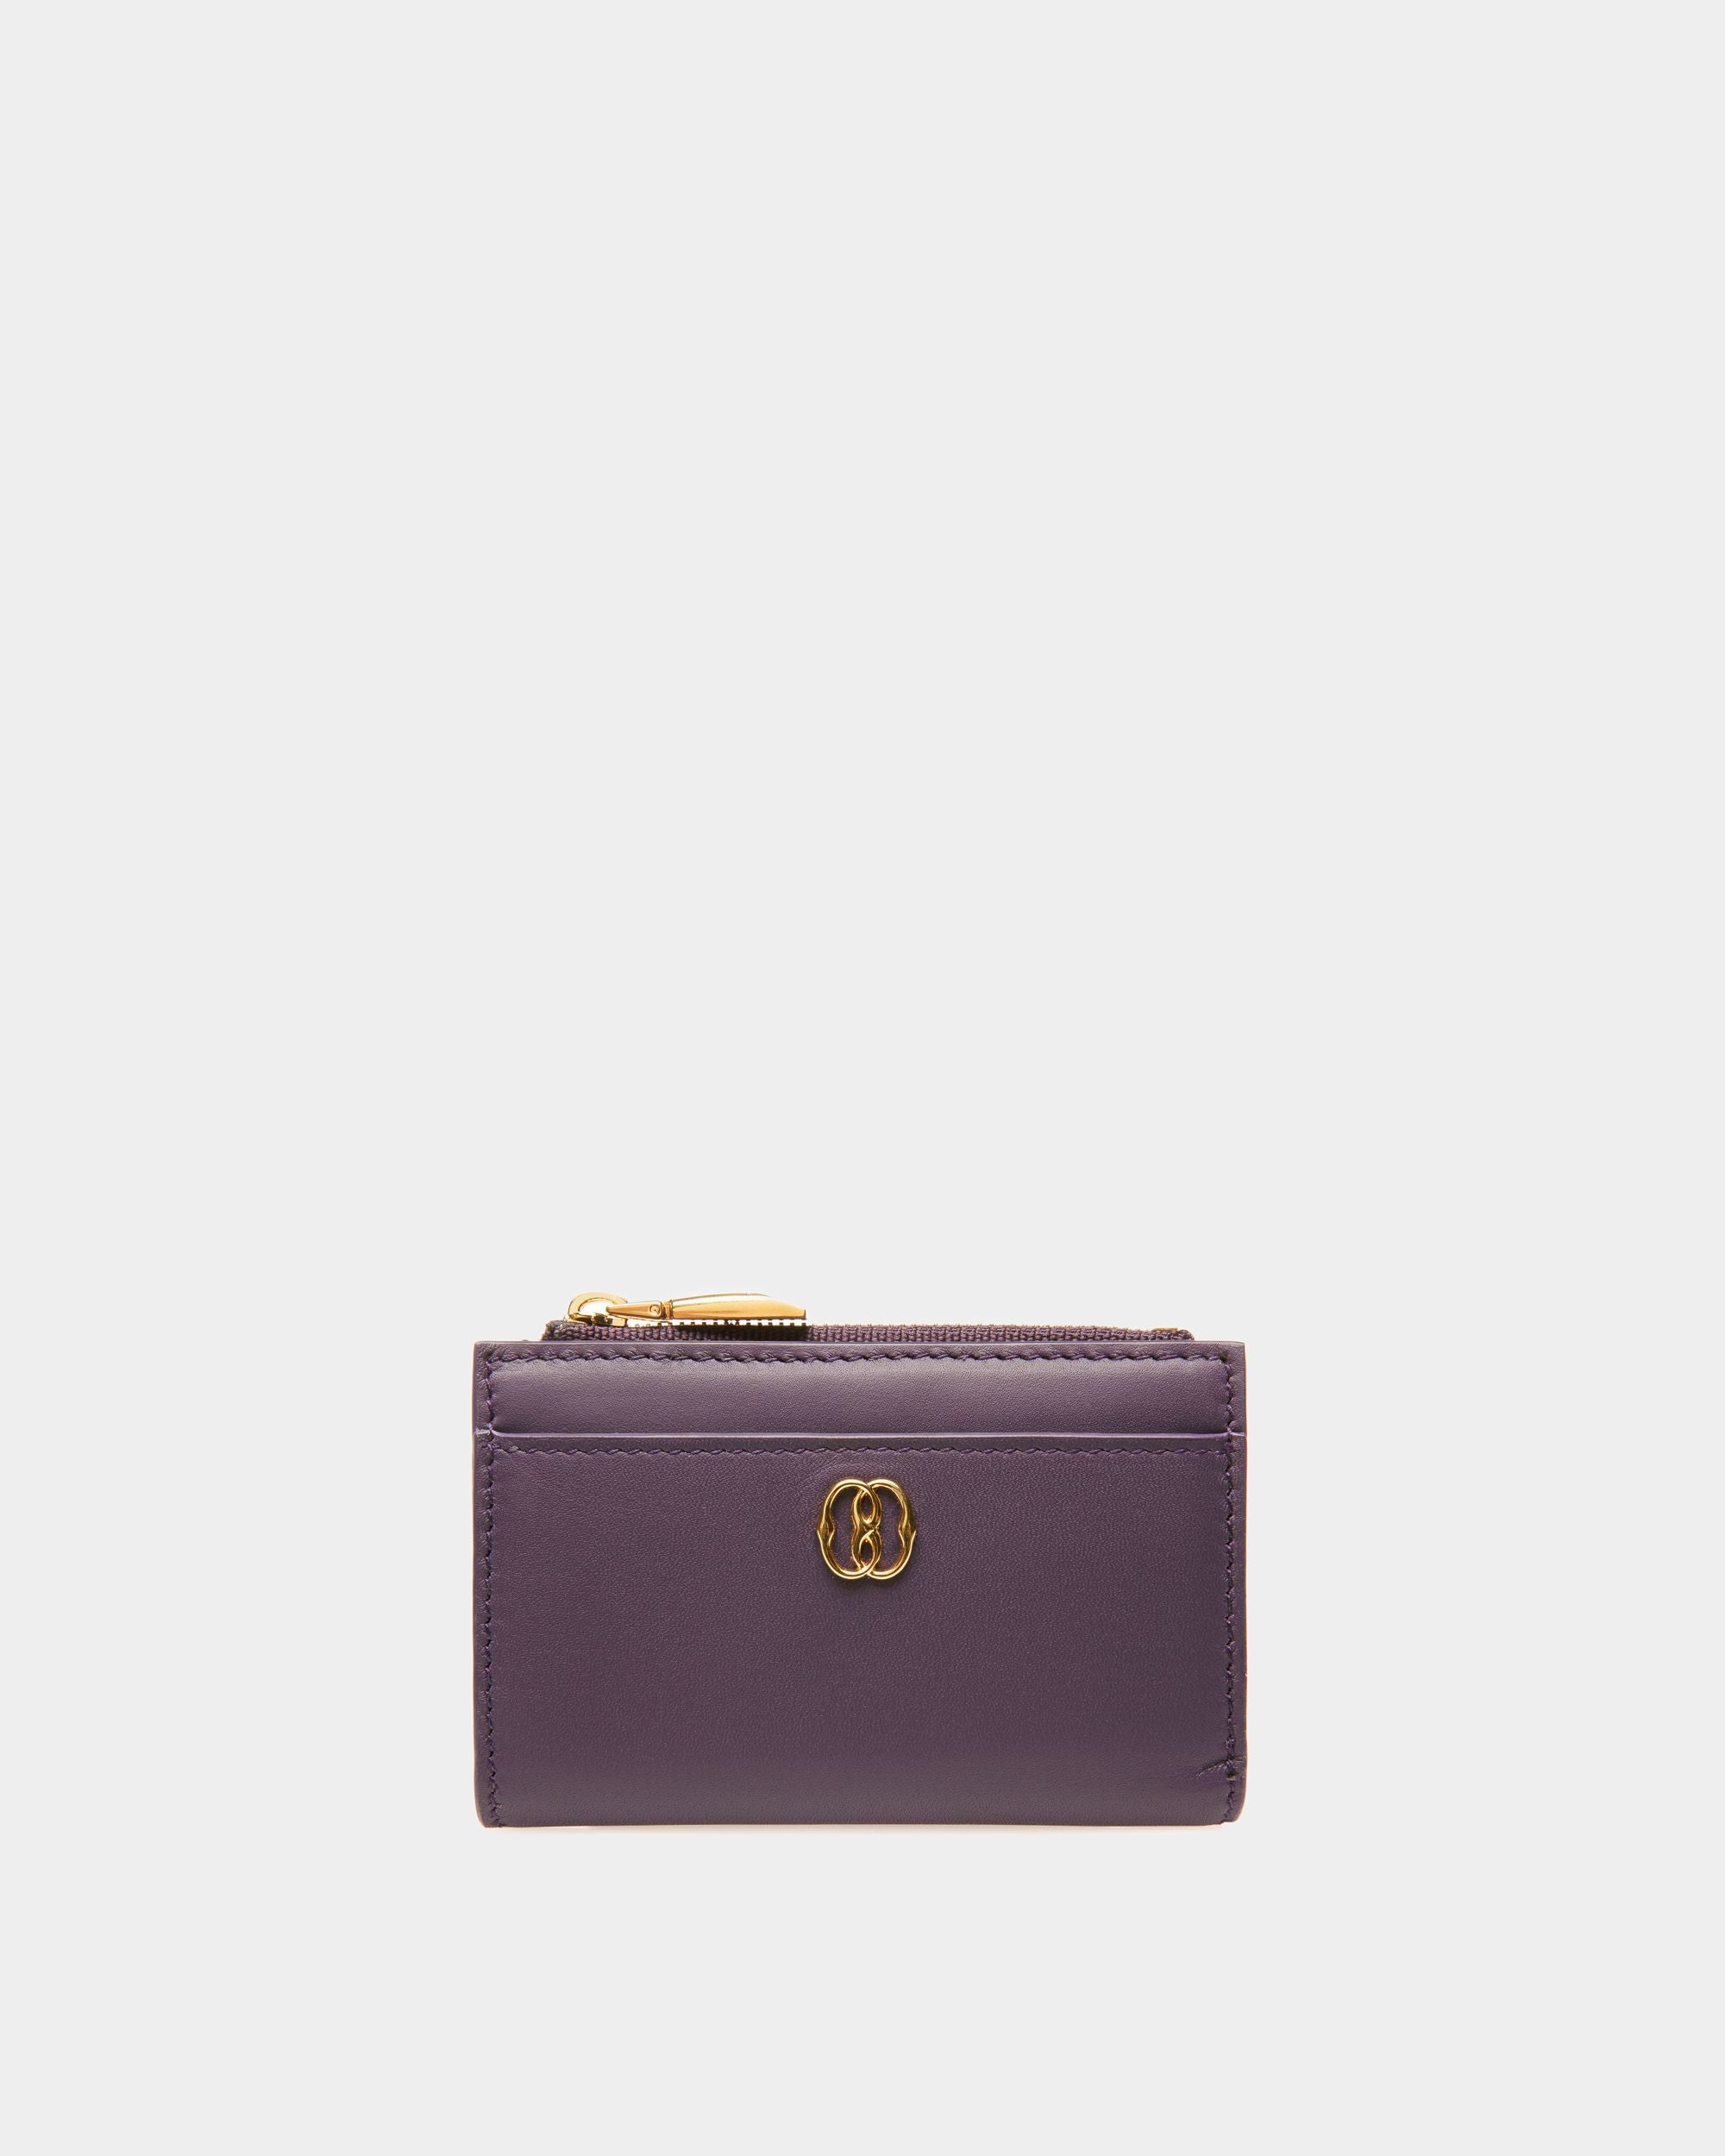 Emblem Compact | Women's Wallets And Coin Purses | Orchid Leather | Bally | Still Life Front